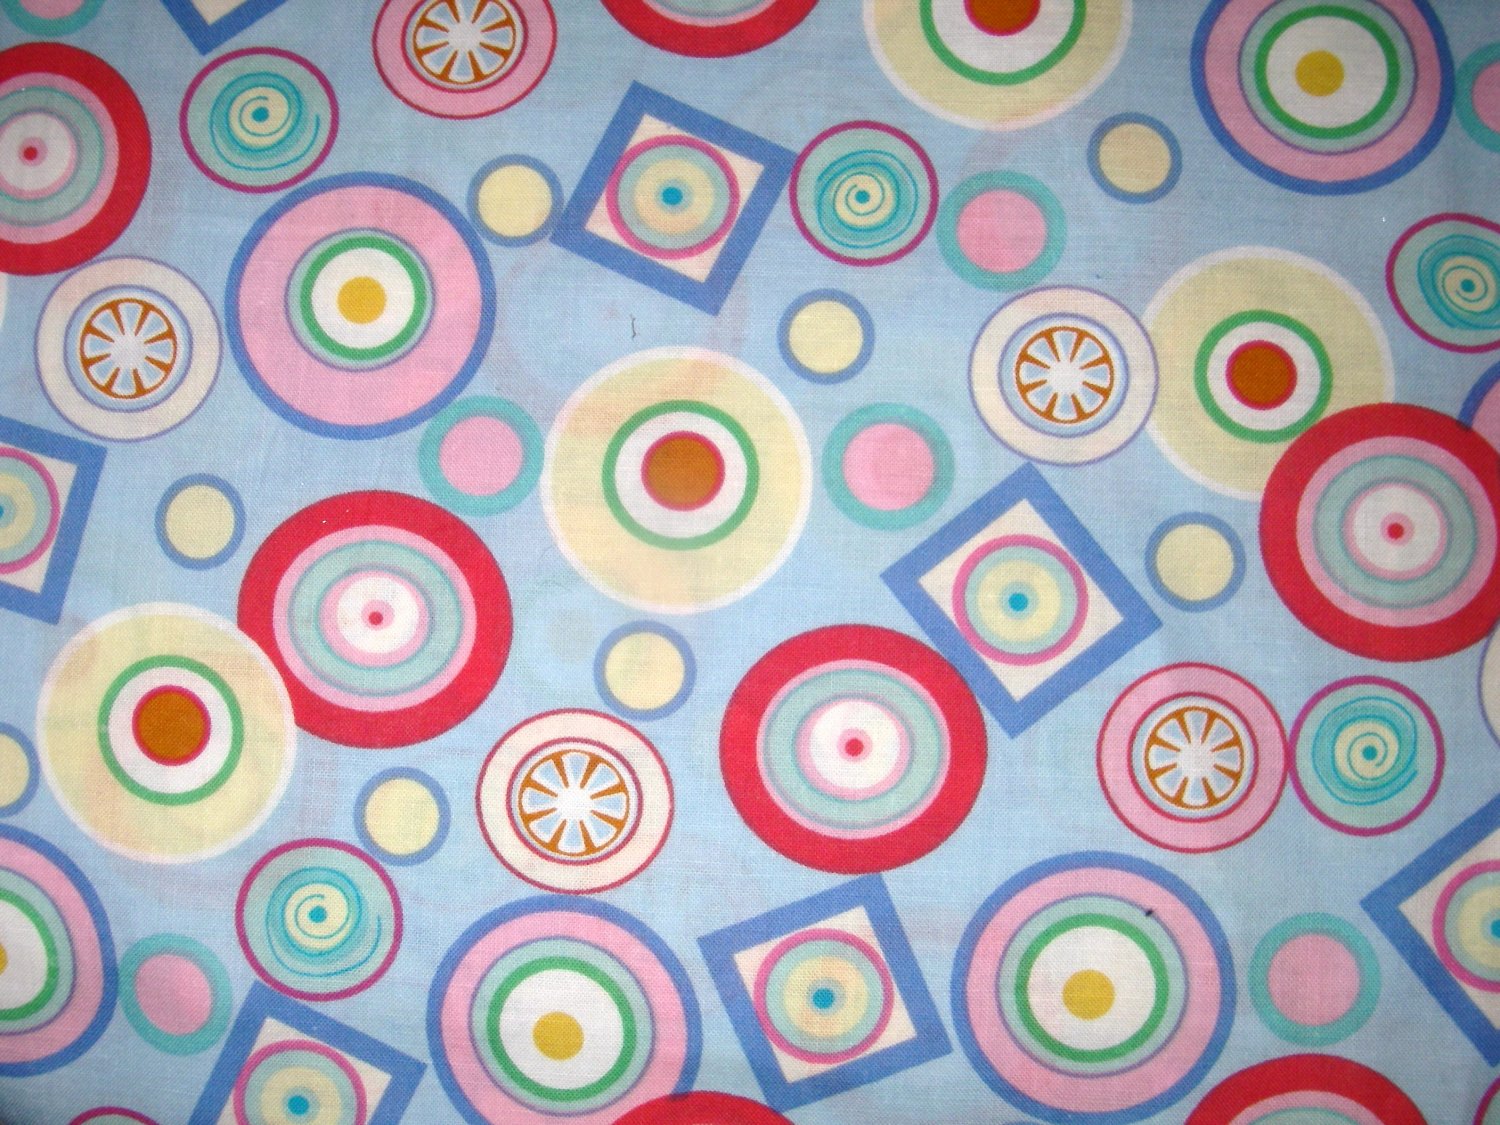 2.5 yards - Circles all over light blue fabric - Pink, yellow, green, blue, red